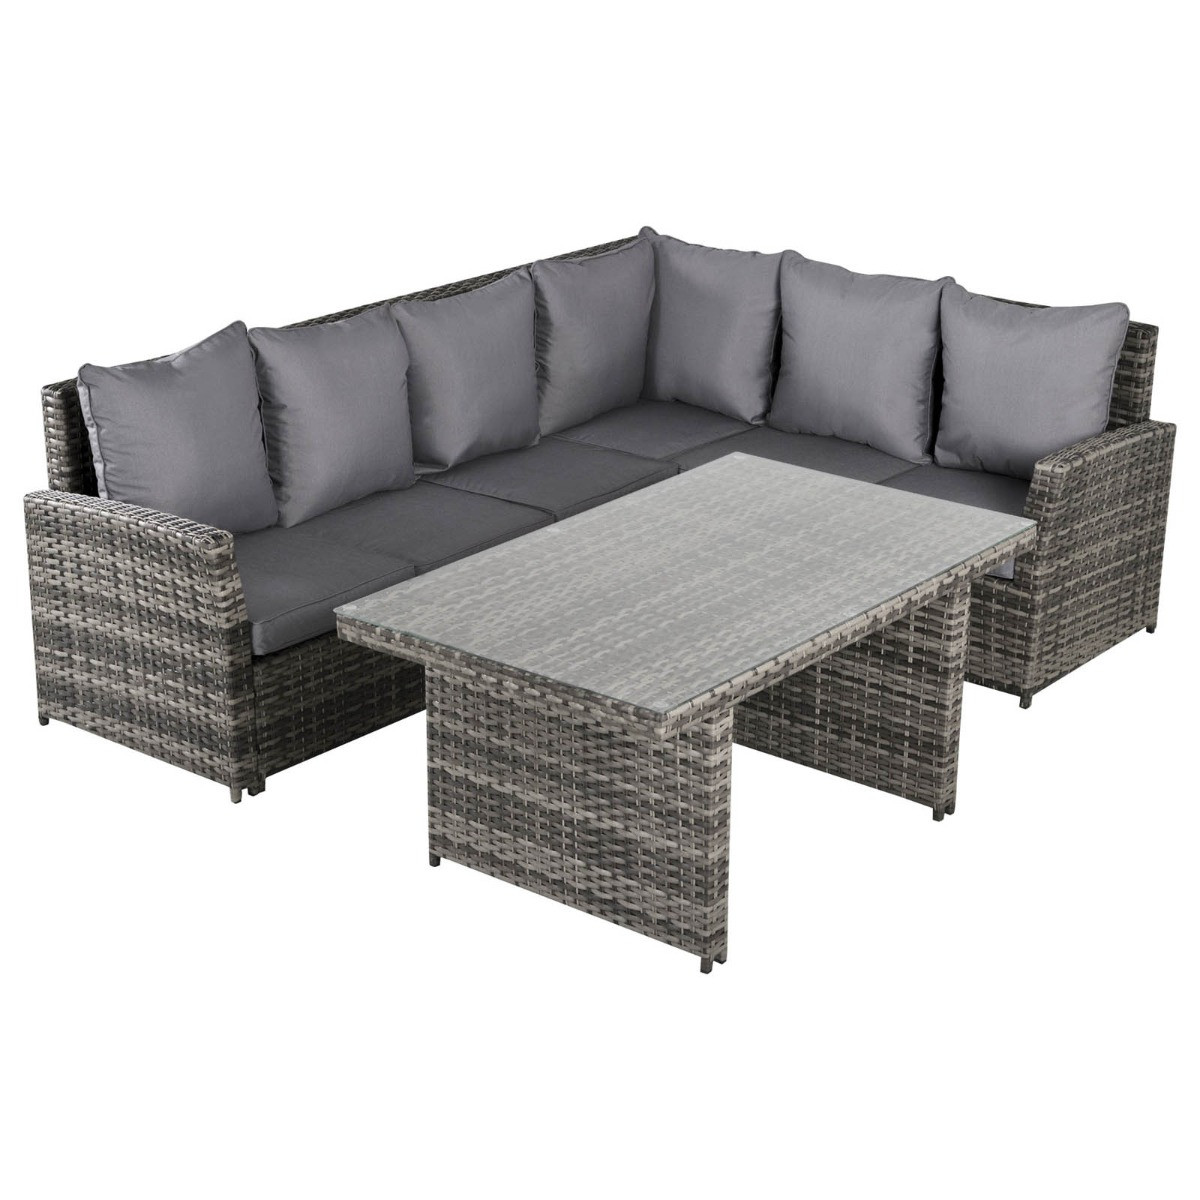 Outsunny Rattan Corner Sofa Dining Set With Tempered Glass Table, Grey - 5 Seater>